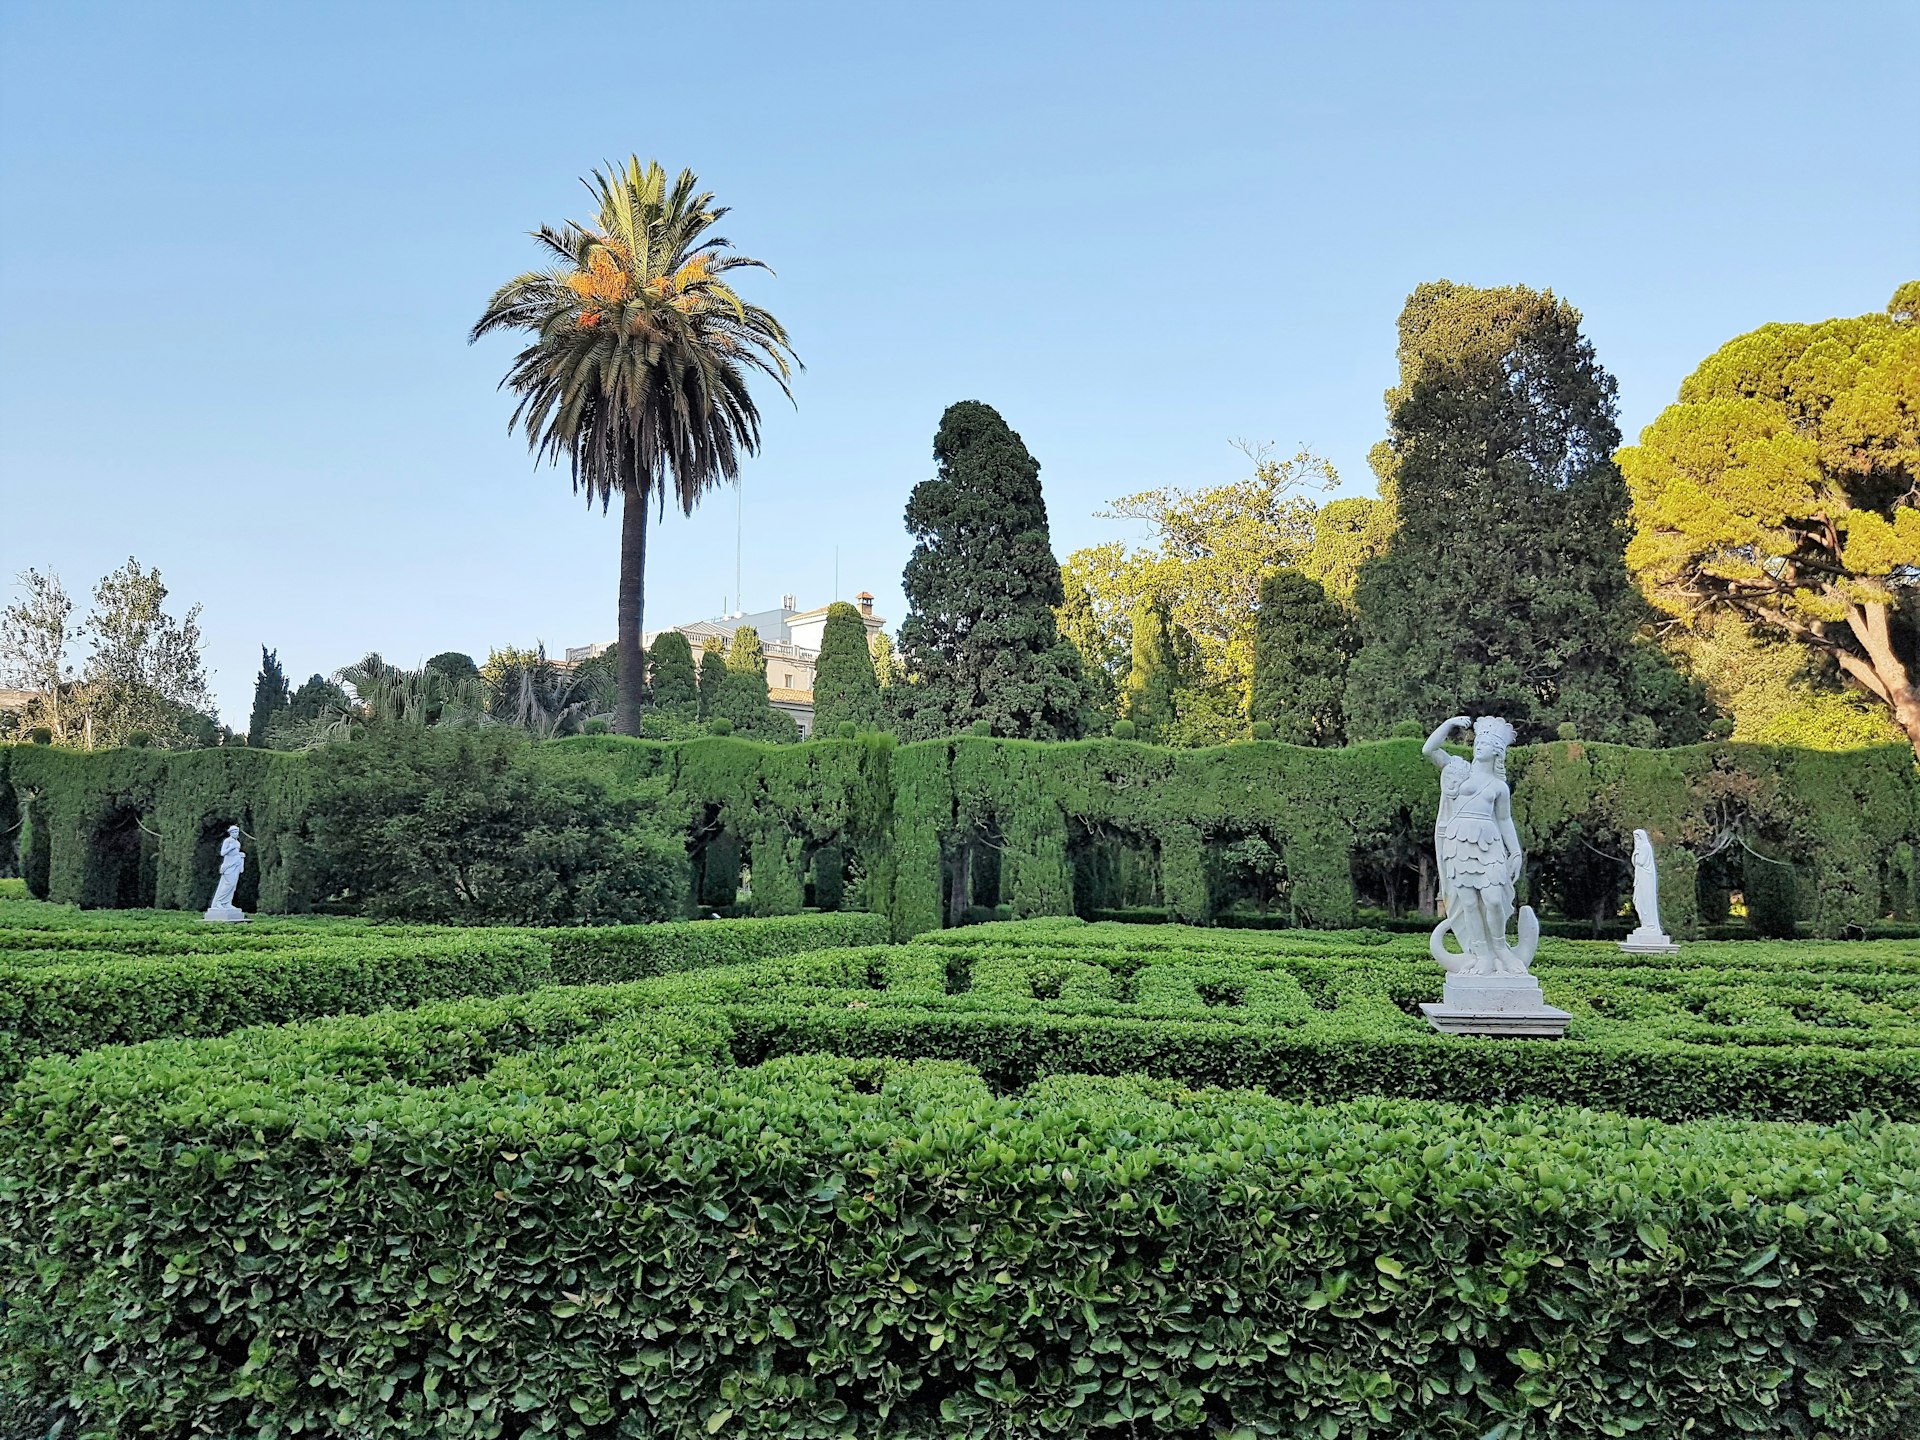 A neoclassical garden featuring manicured hedges and a marble sculpture with palm trees in the background